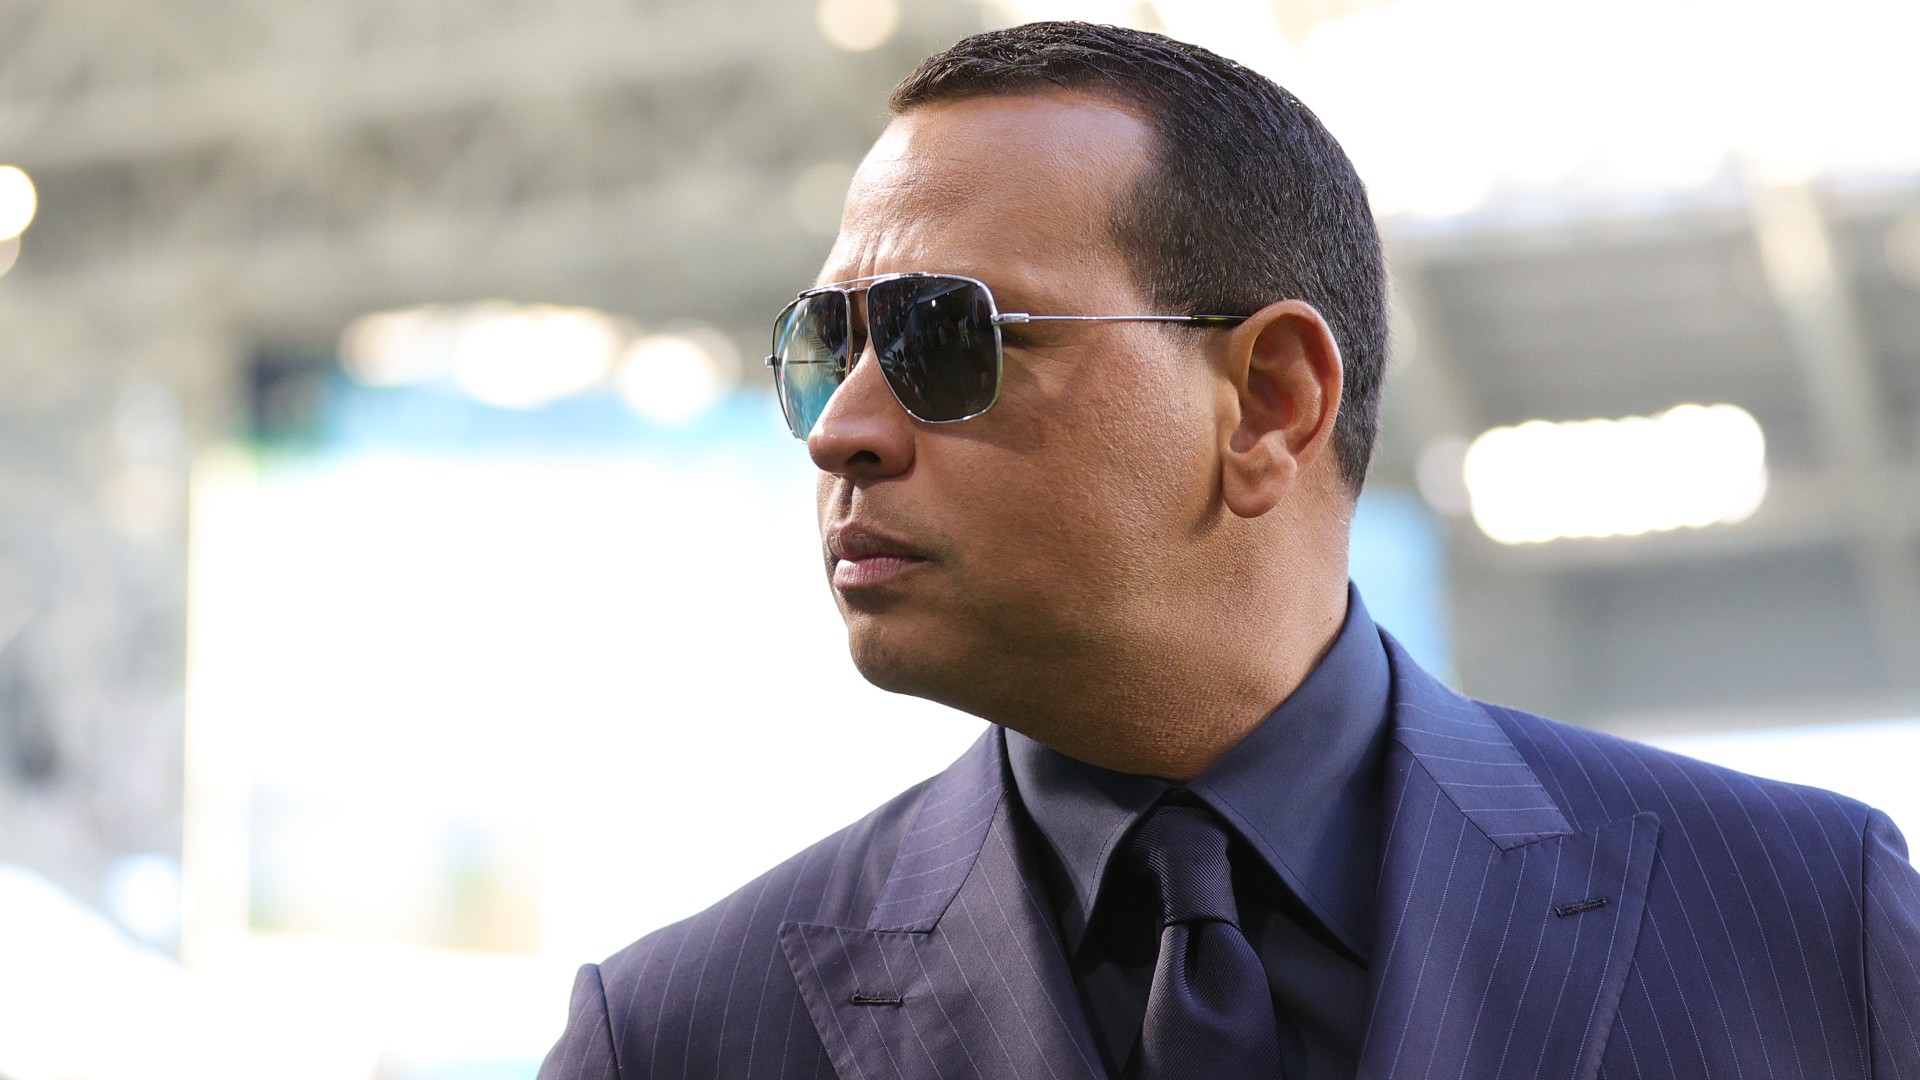 MLB great Alex Rodriguez and ex-Walmart executive Marc Lore are buying the NBA's Minnesota Timberwolves.